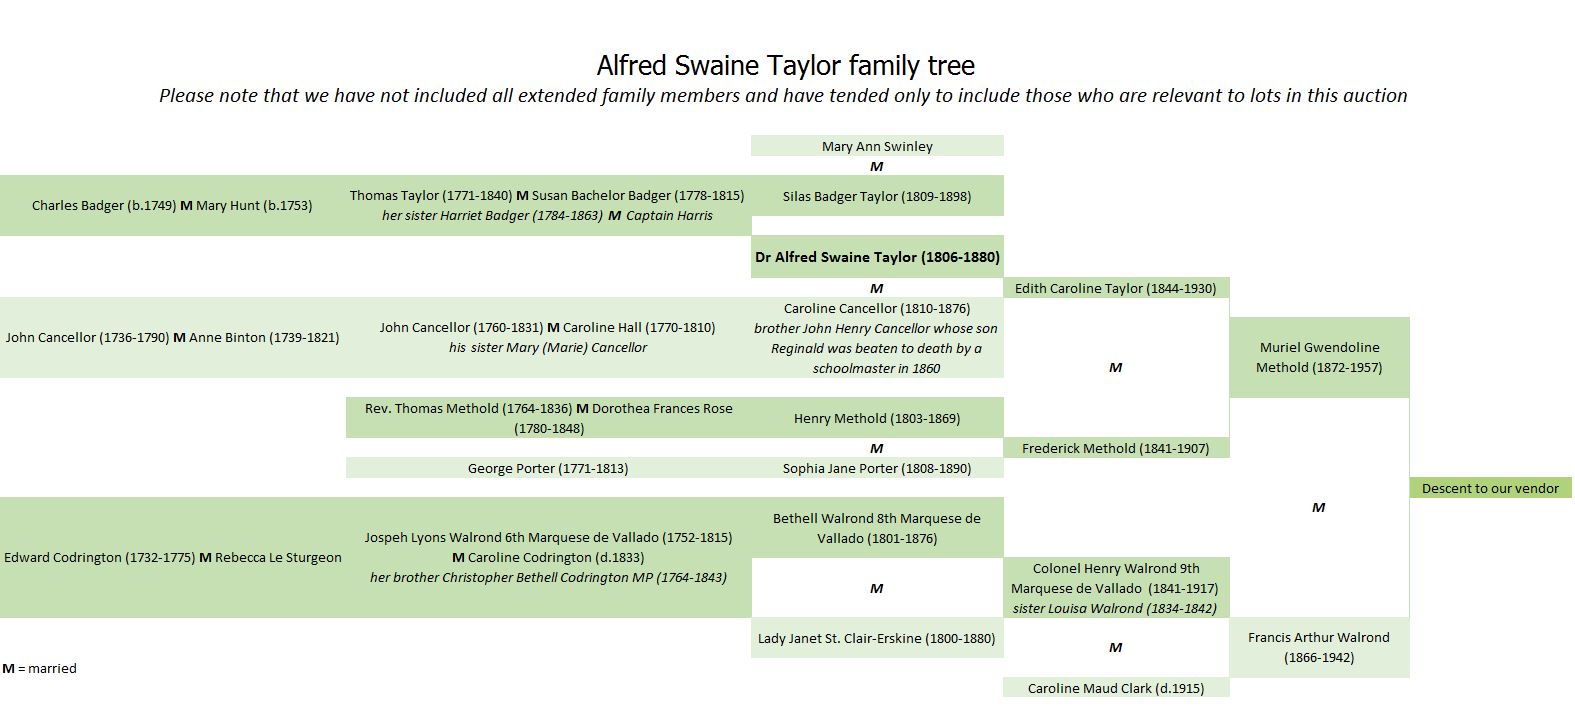 Alfred Swaine Taylor family tree